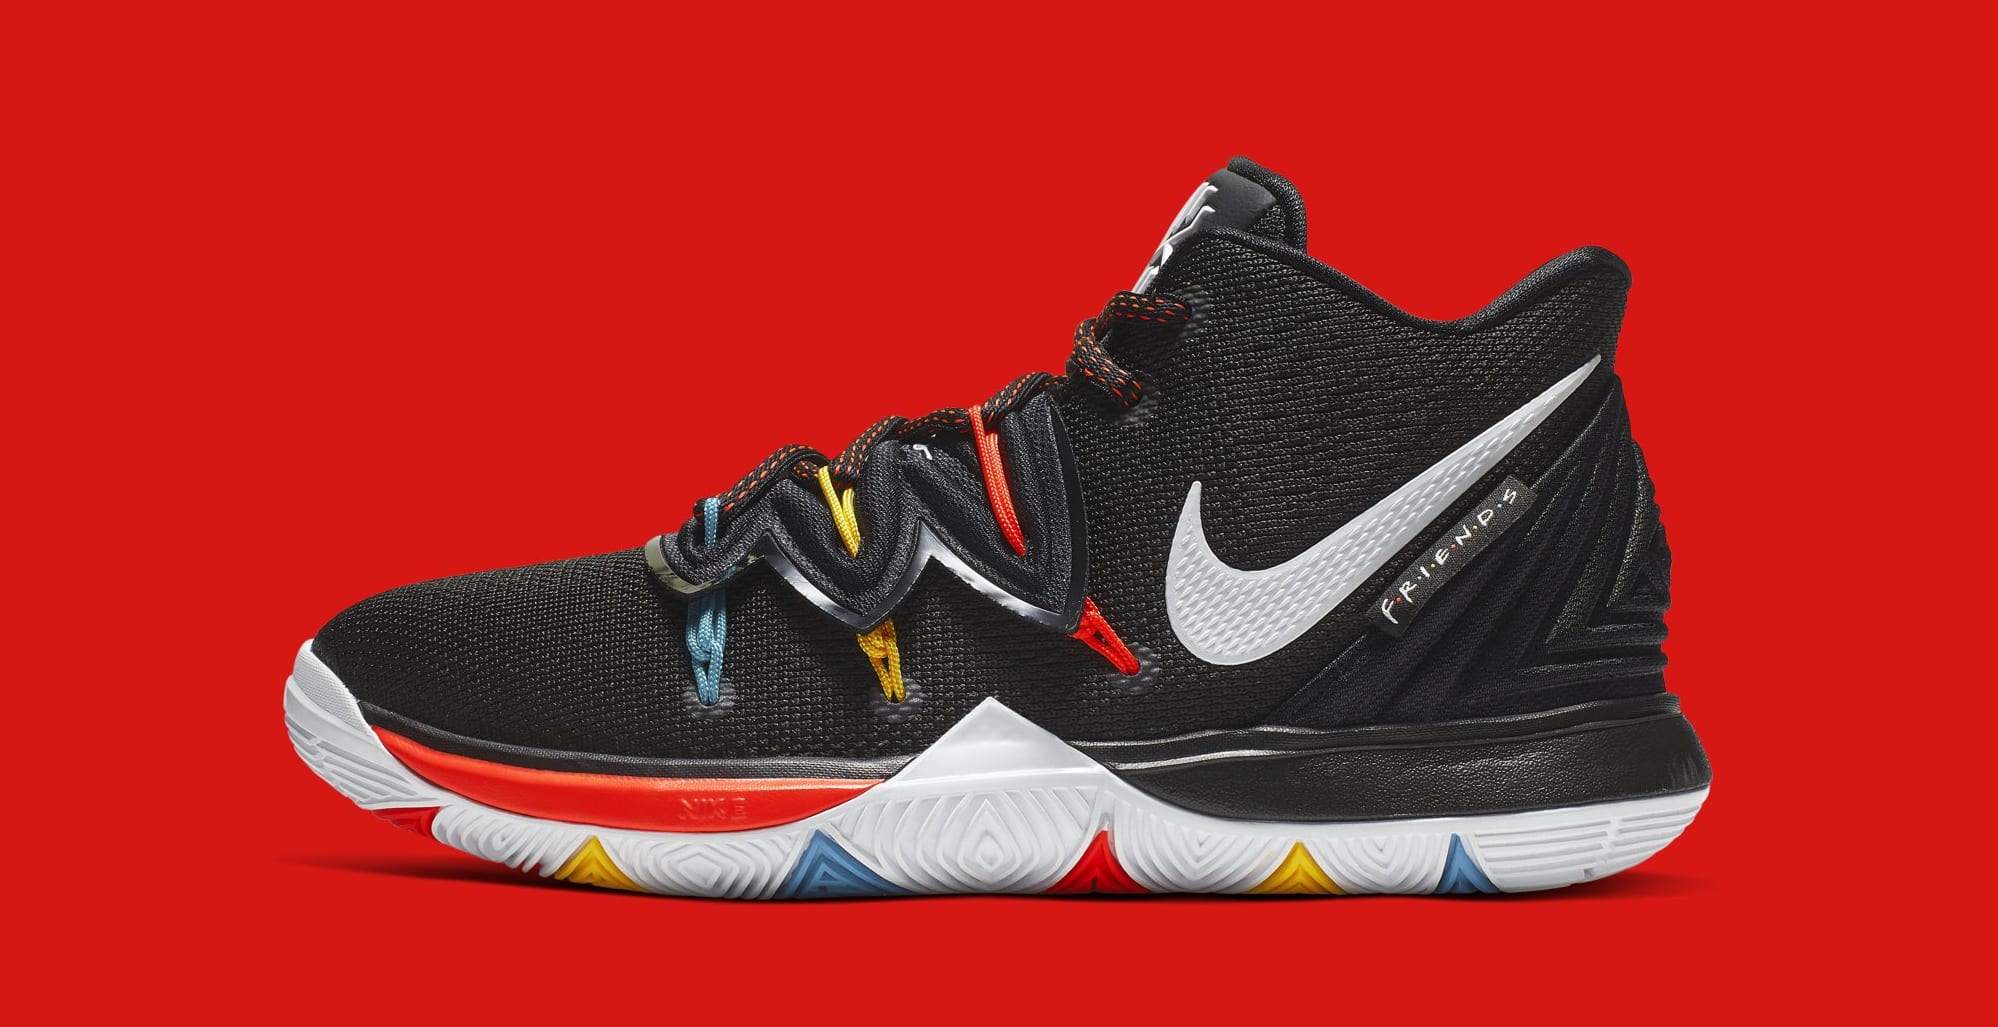 kyrie 5 launch